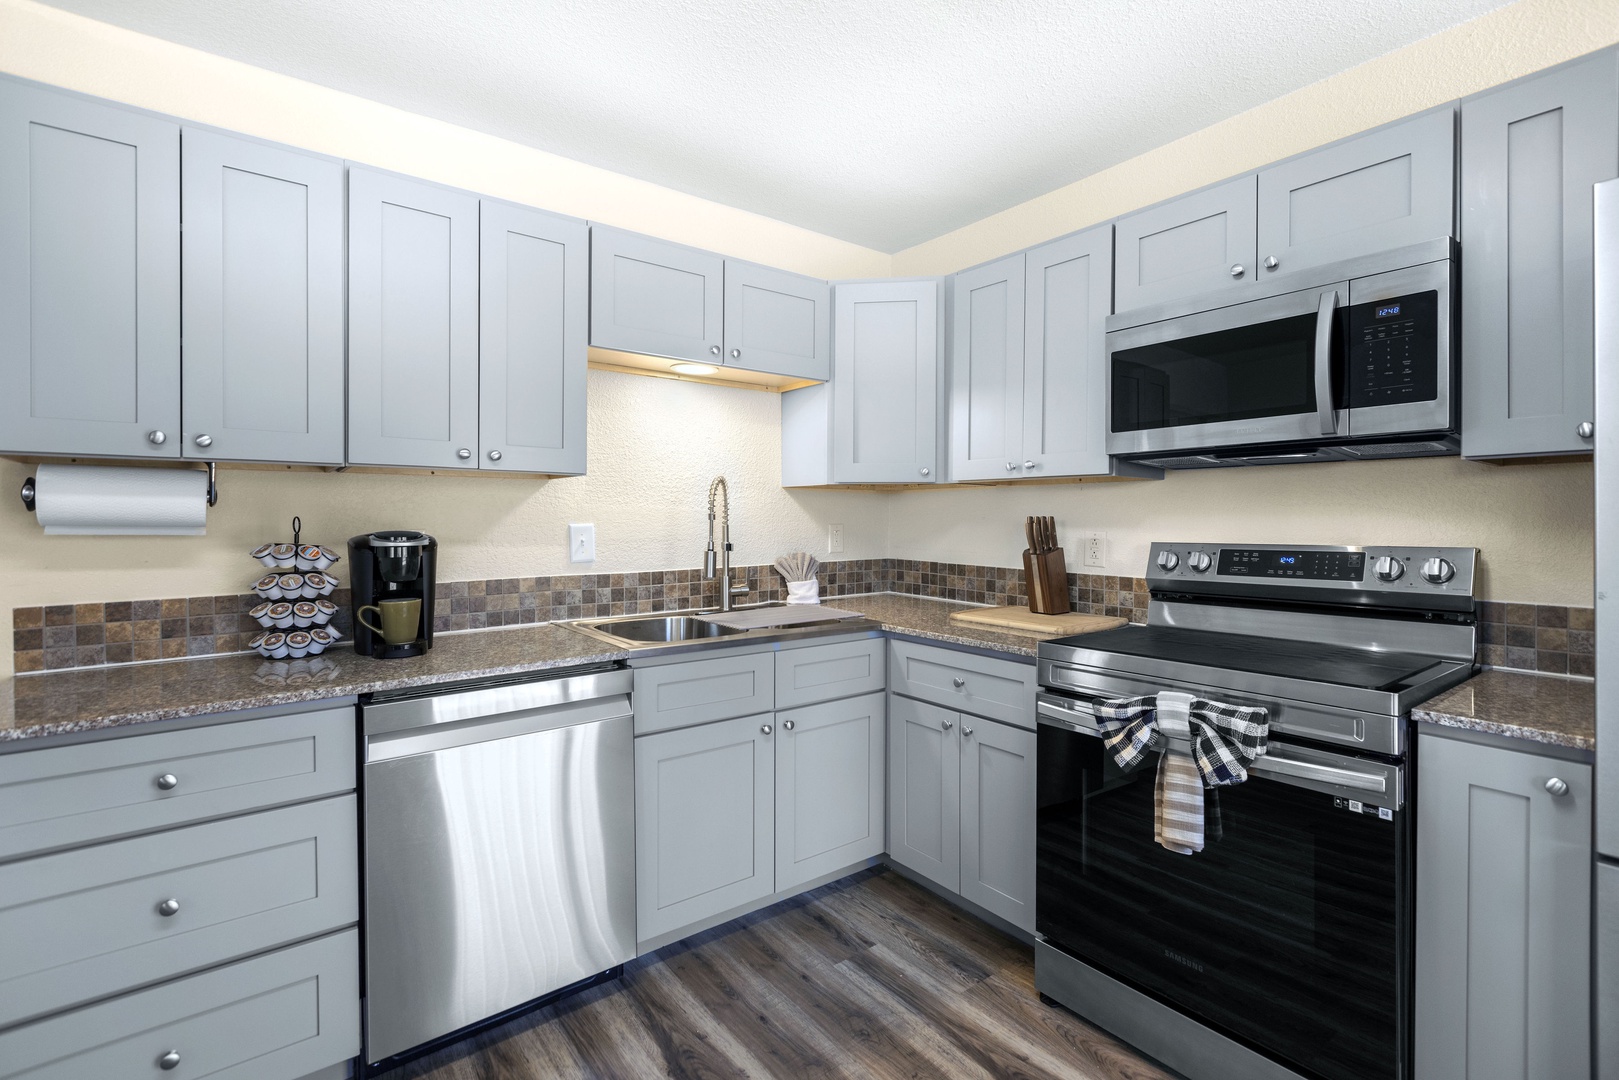 The 1st of 2 full kitchens offers ample space & all the comforts of home